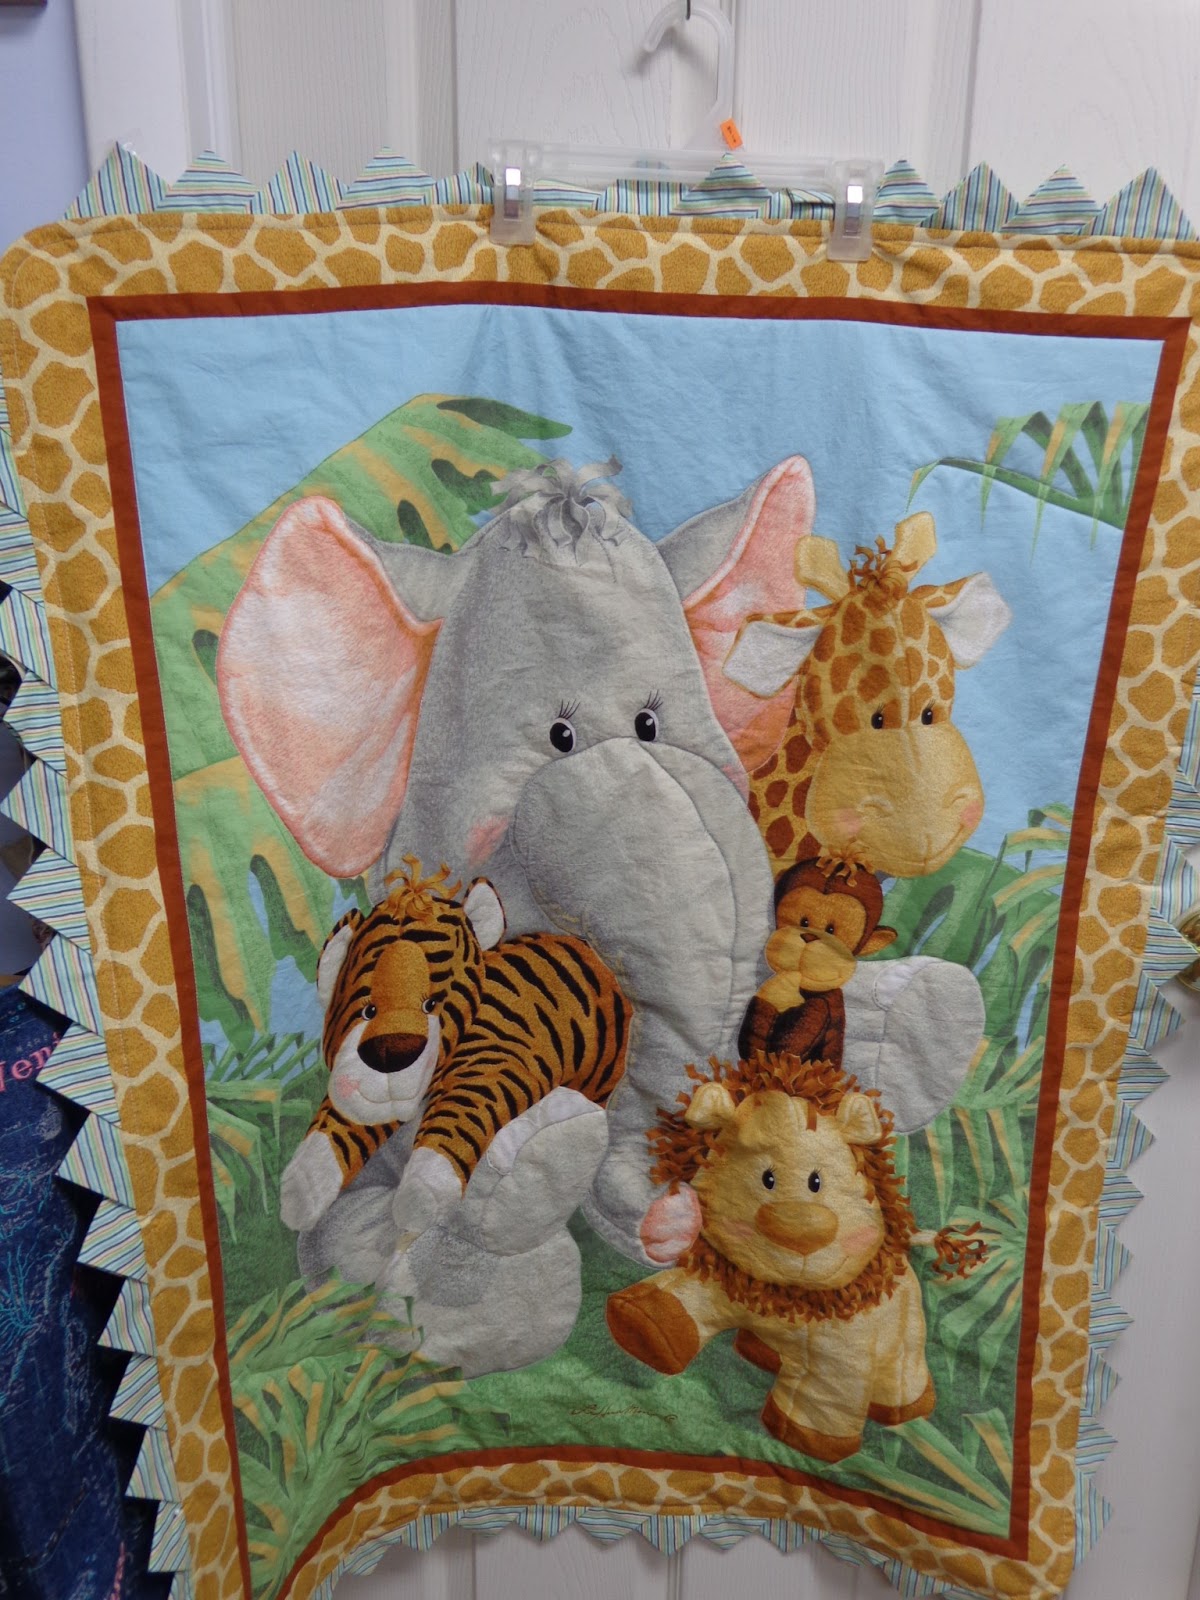 Simply Devine: Turn a Fabric Panel into a Special Baby Quilt